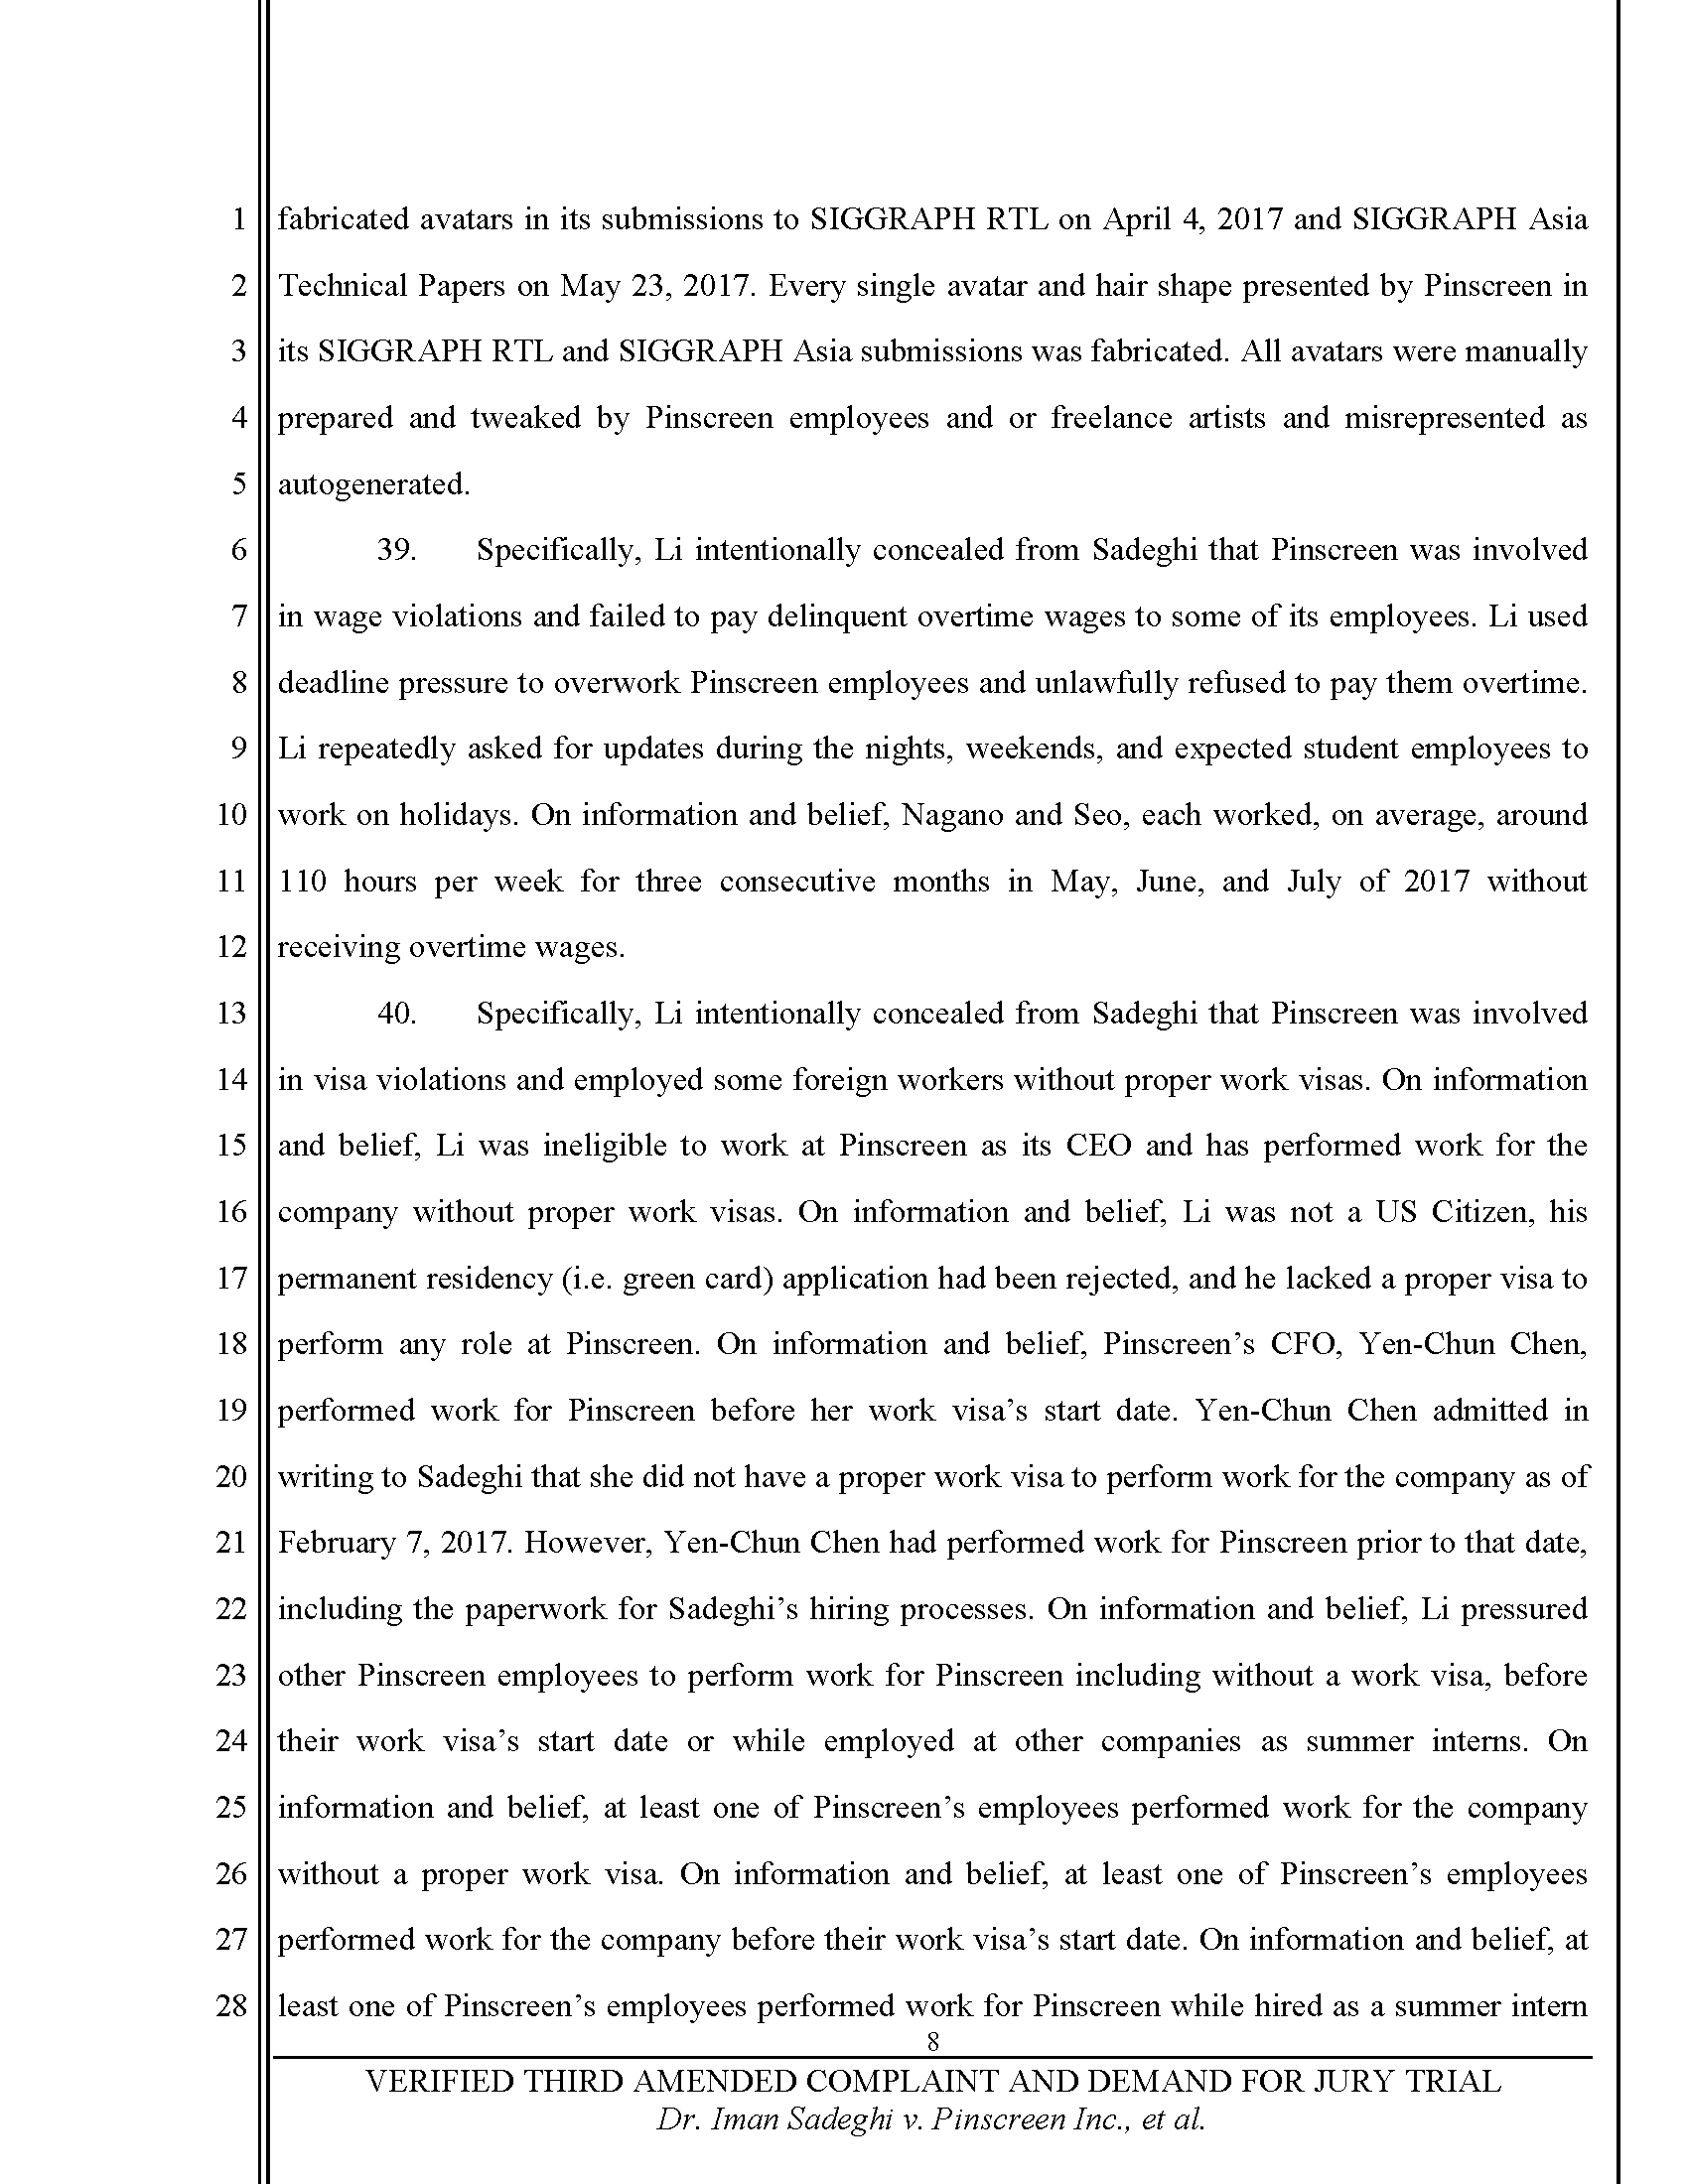 Third Amended Complaint (TAC) Page 9